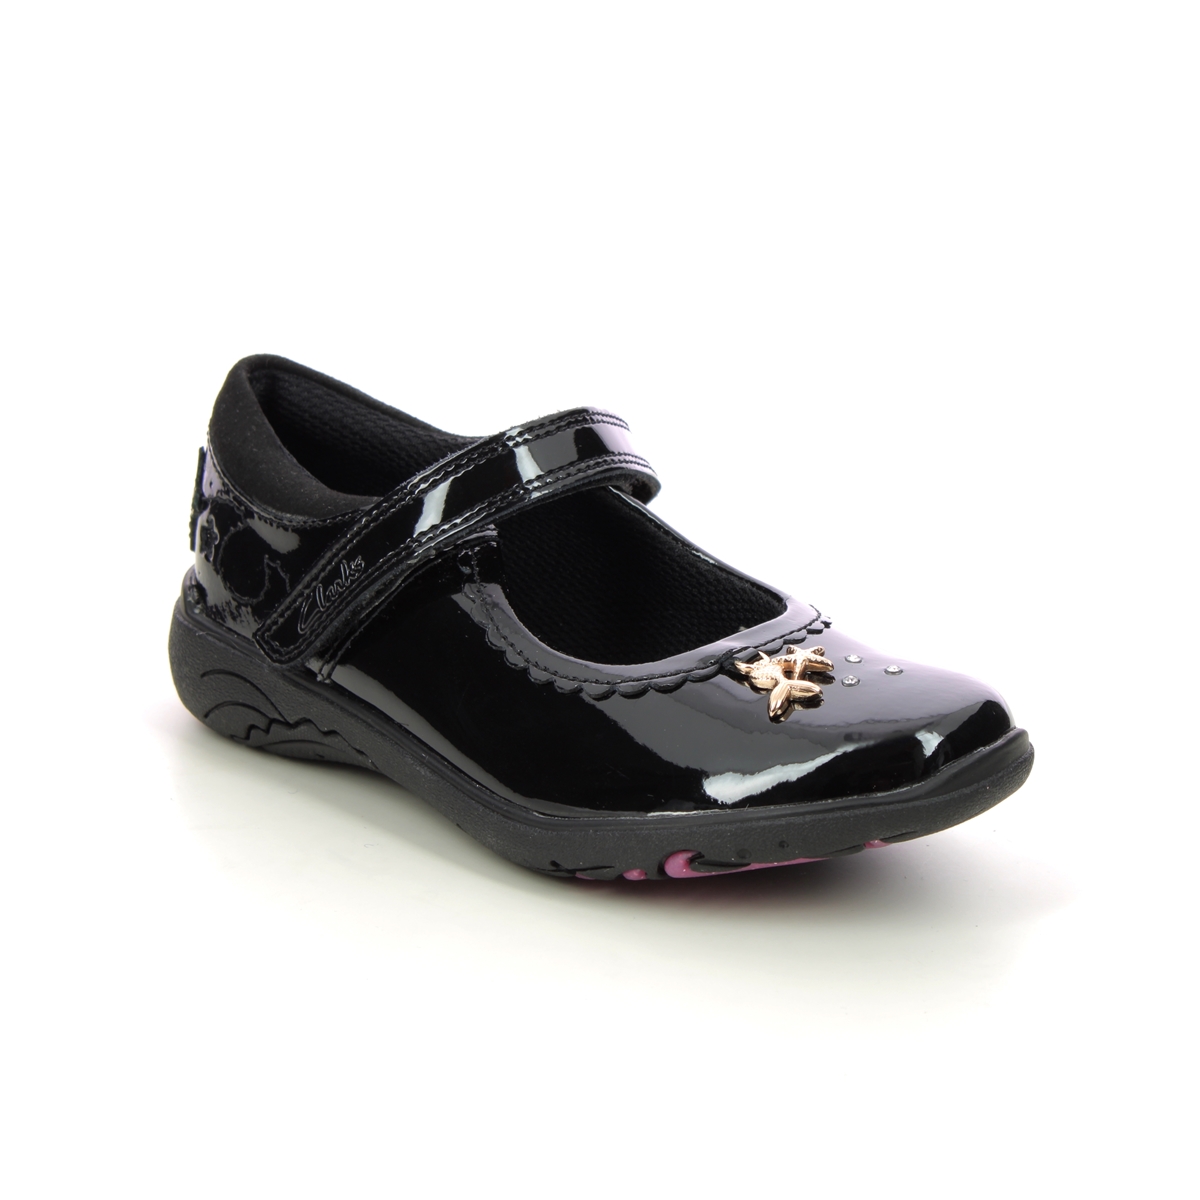 Clarks Relda Sea K Mary Jane Black Patent Kids Girls School Shoes 722418H In Size 9 In Plain Black Patent H Width Fitting Extra Wide For School For ki